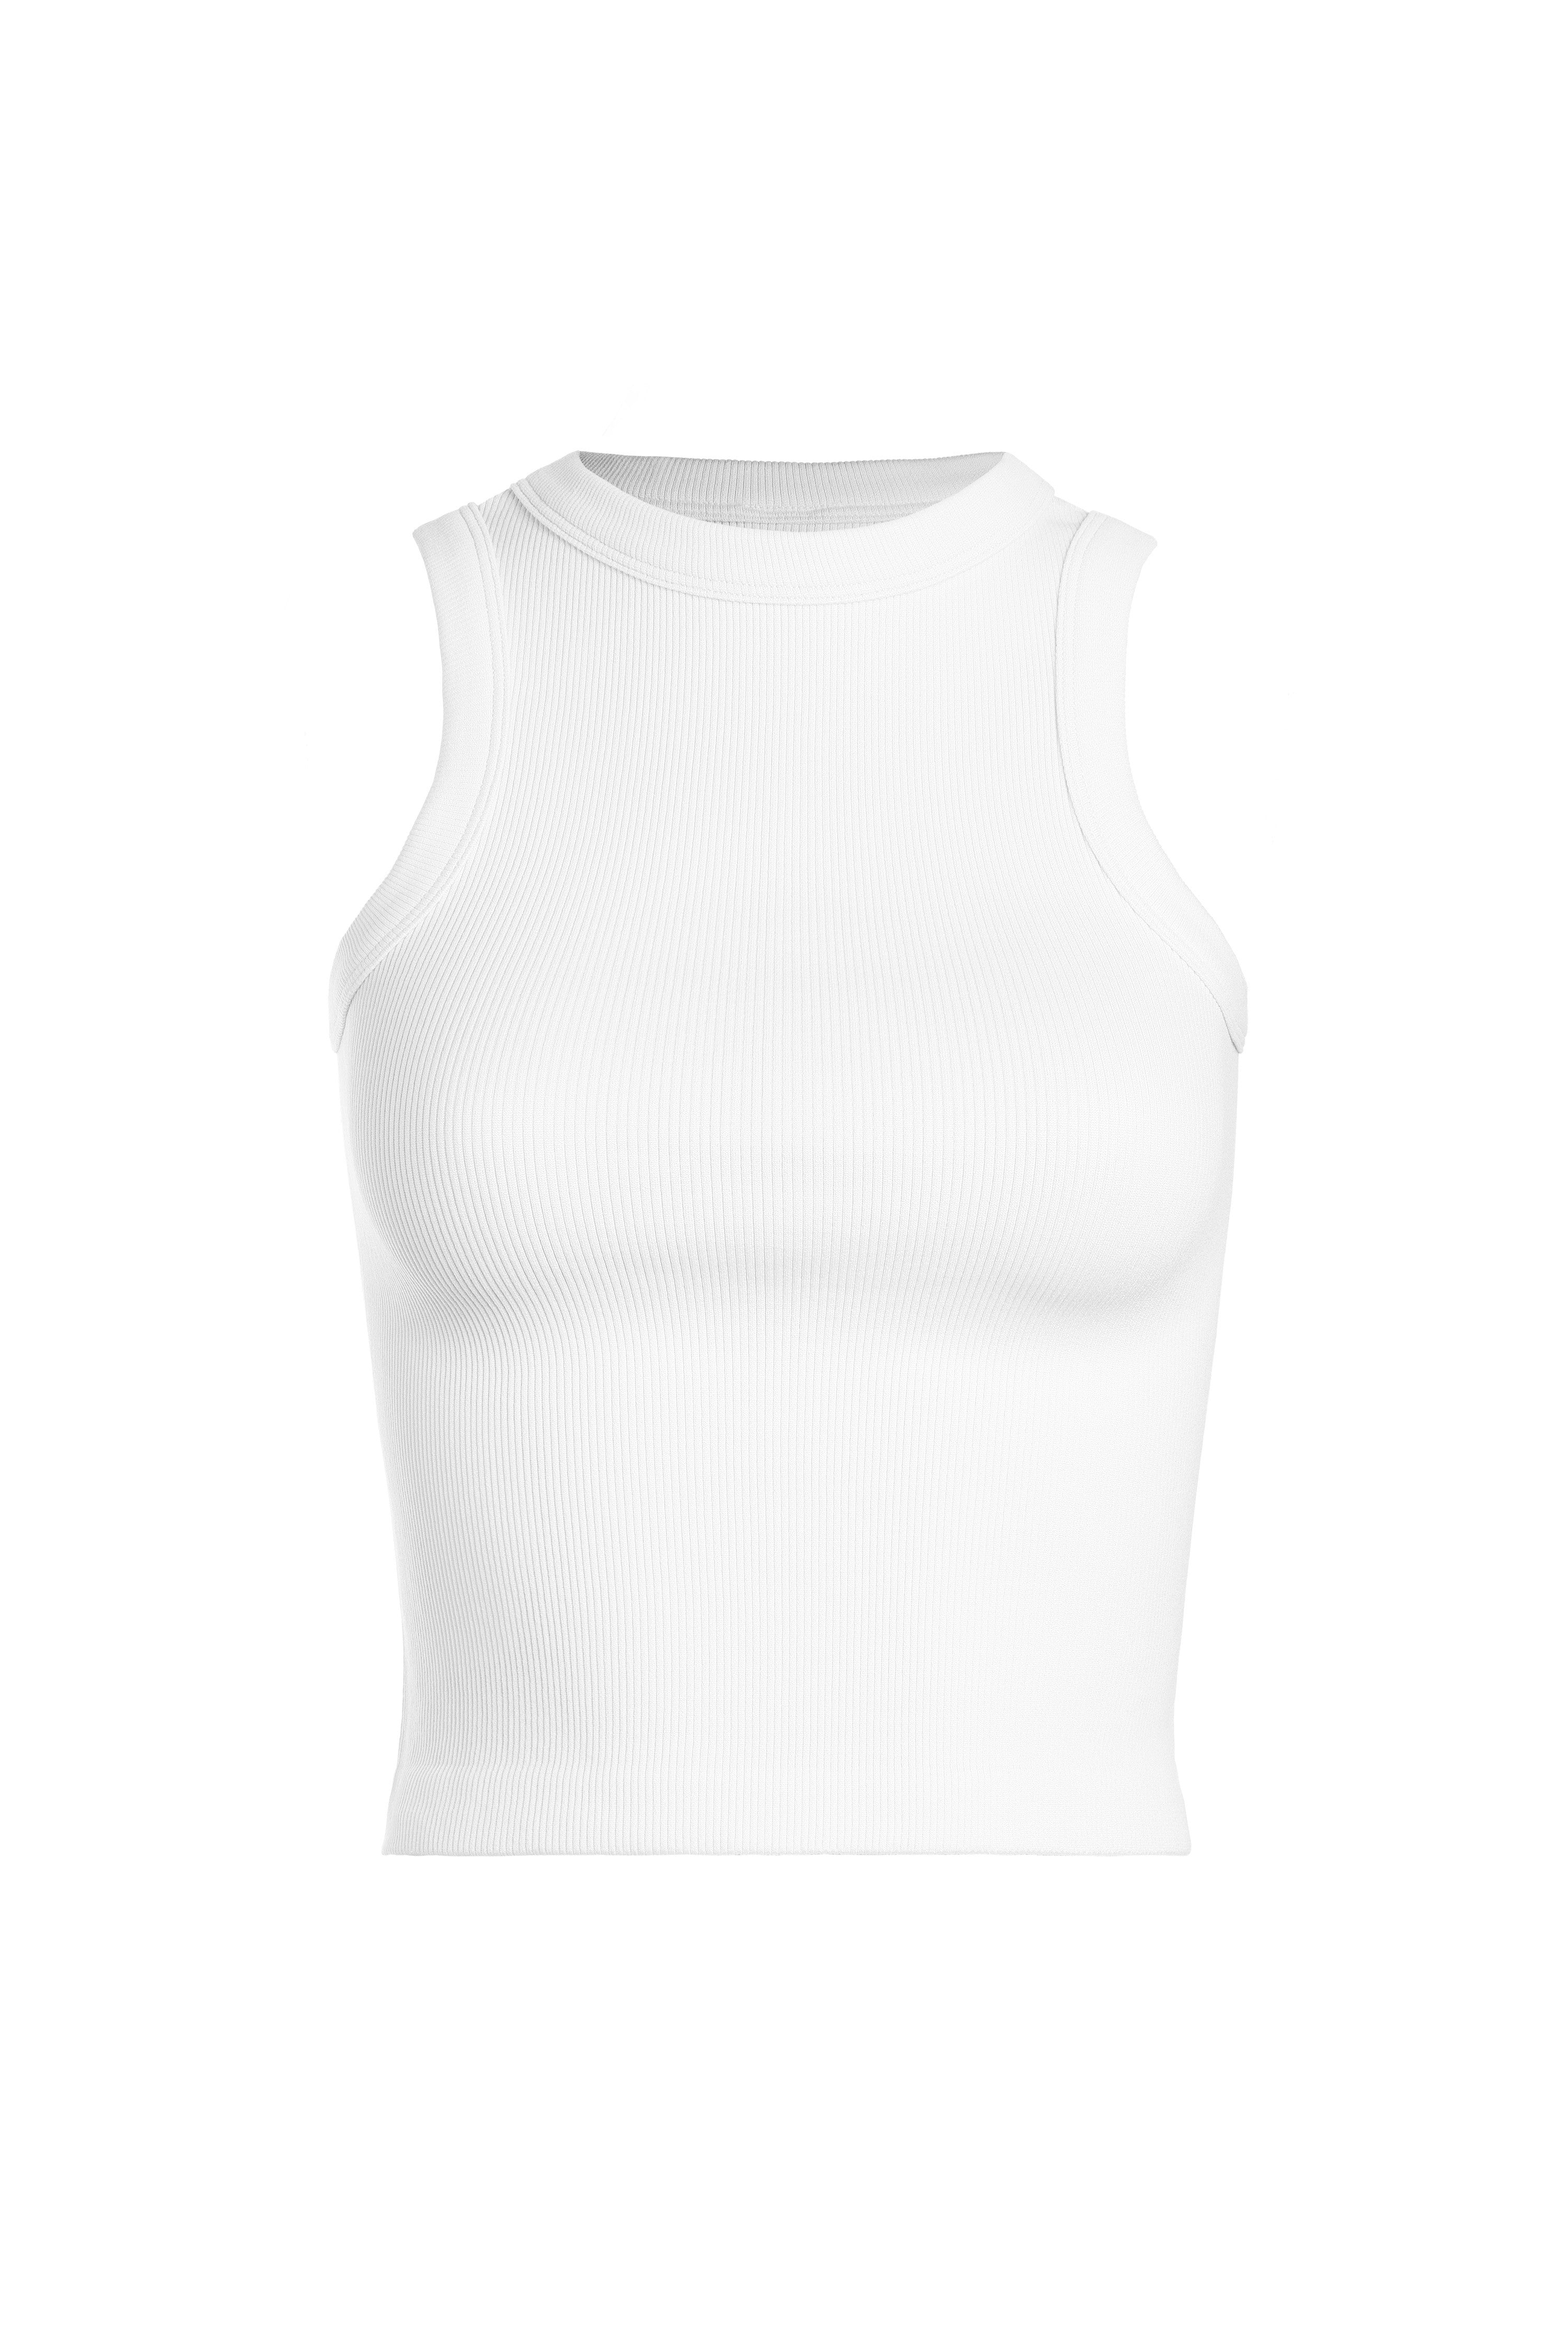 White Ribbed Basic Tank | Collective Request 